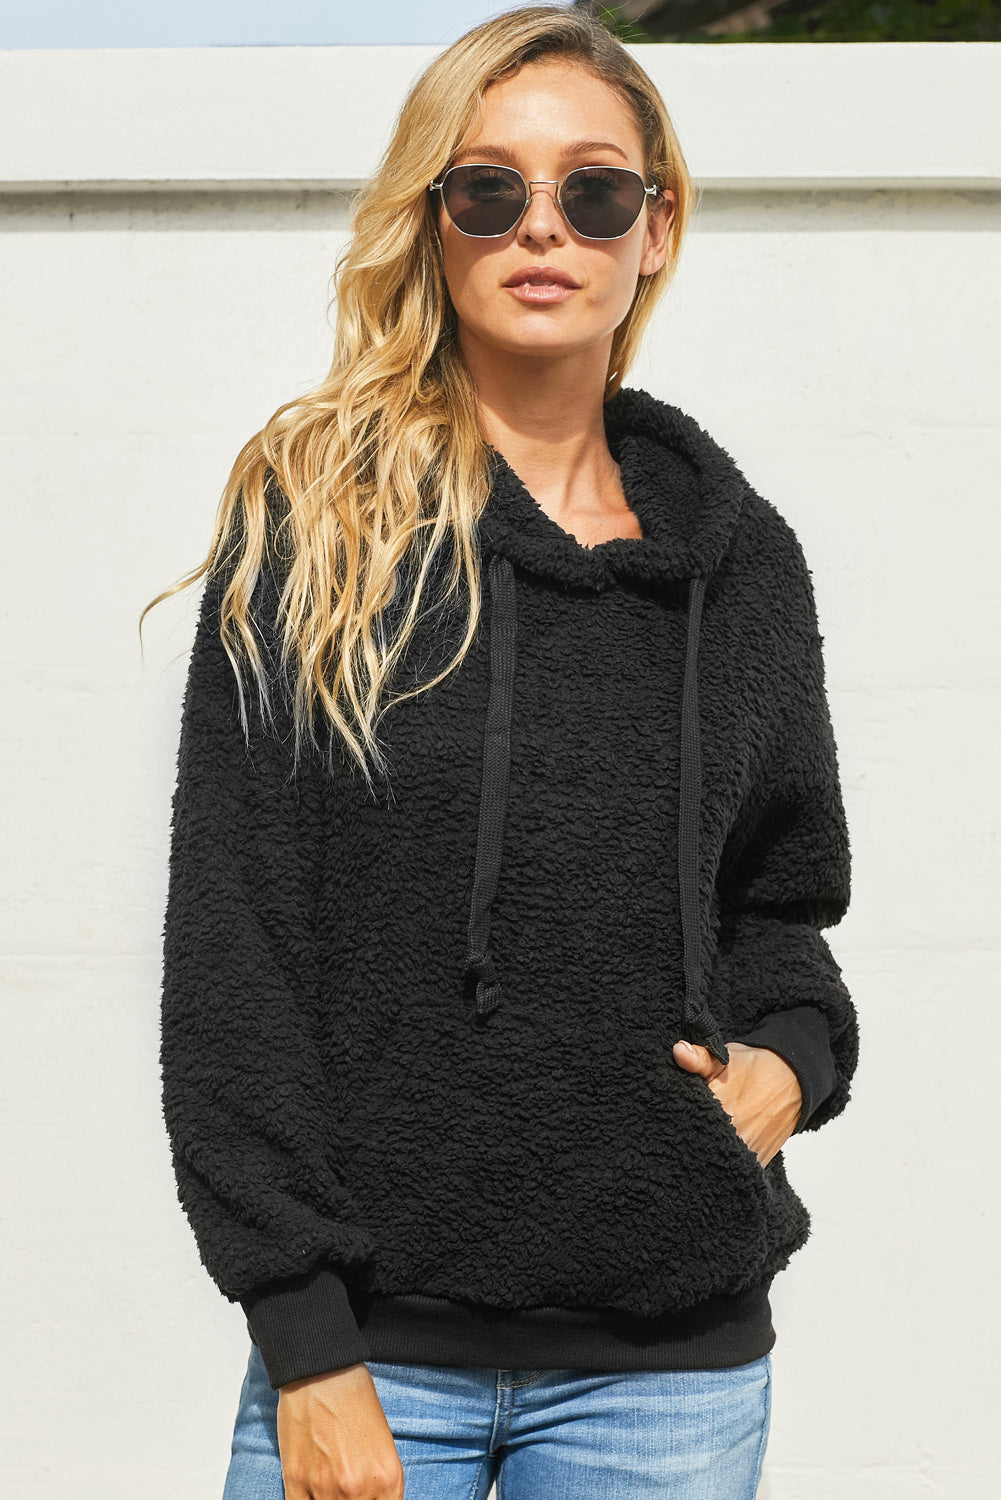 Drawstring Sherpa Hoodie with Pocket - Area F Island Clothing